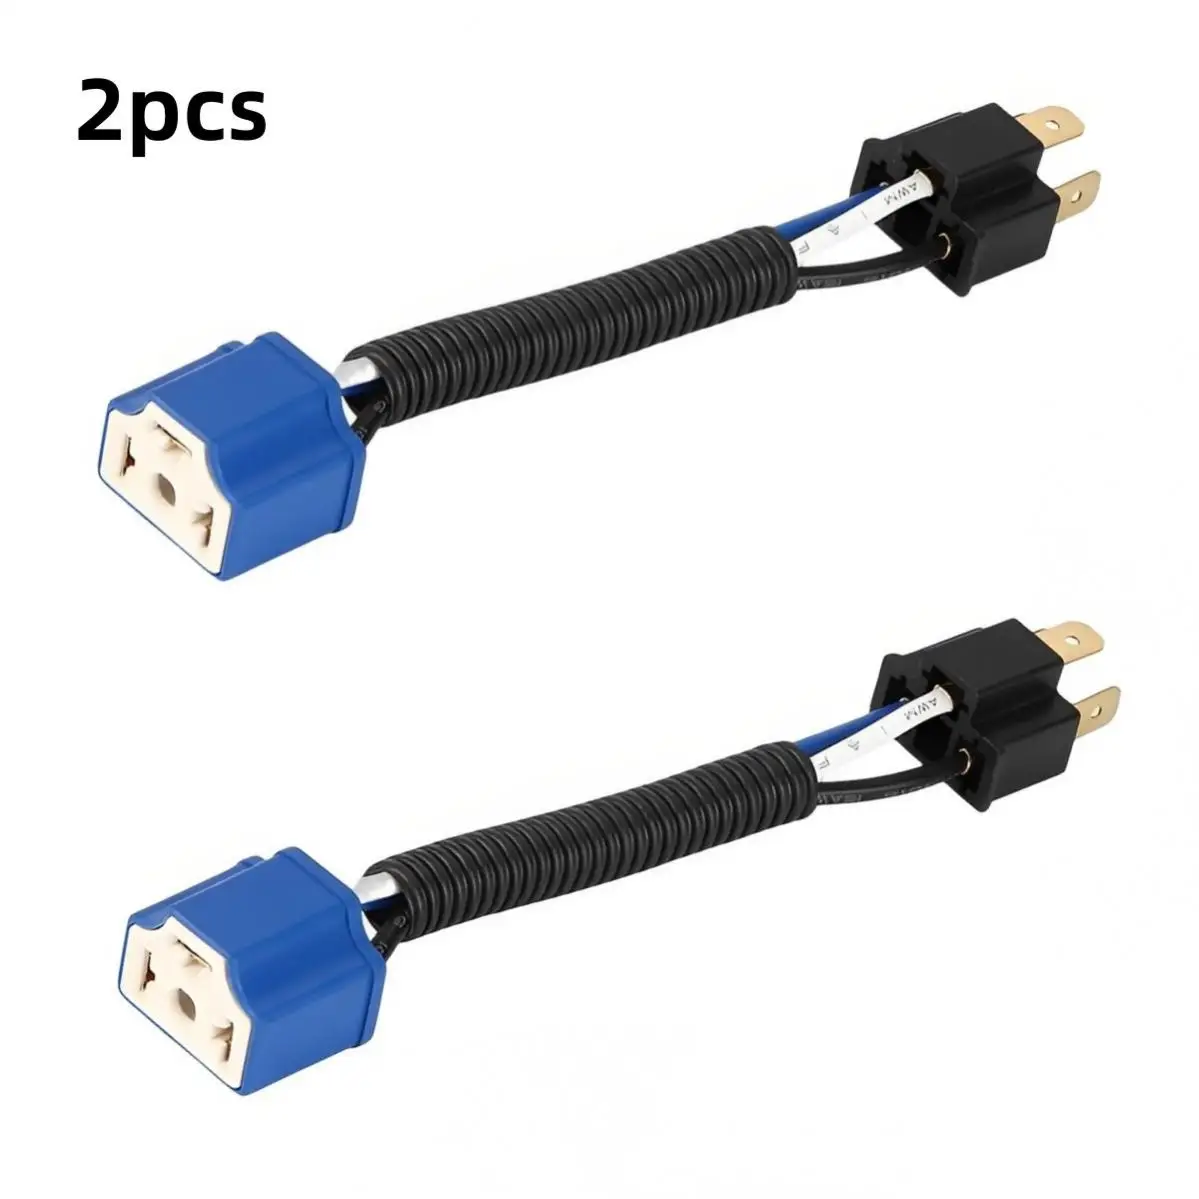 

2pcs/set H4 12V Car Light Harness Connector Car Wire Socket Adapter for Taillight / Time Running Lamps / Headlight